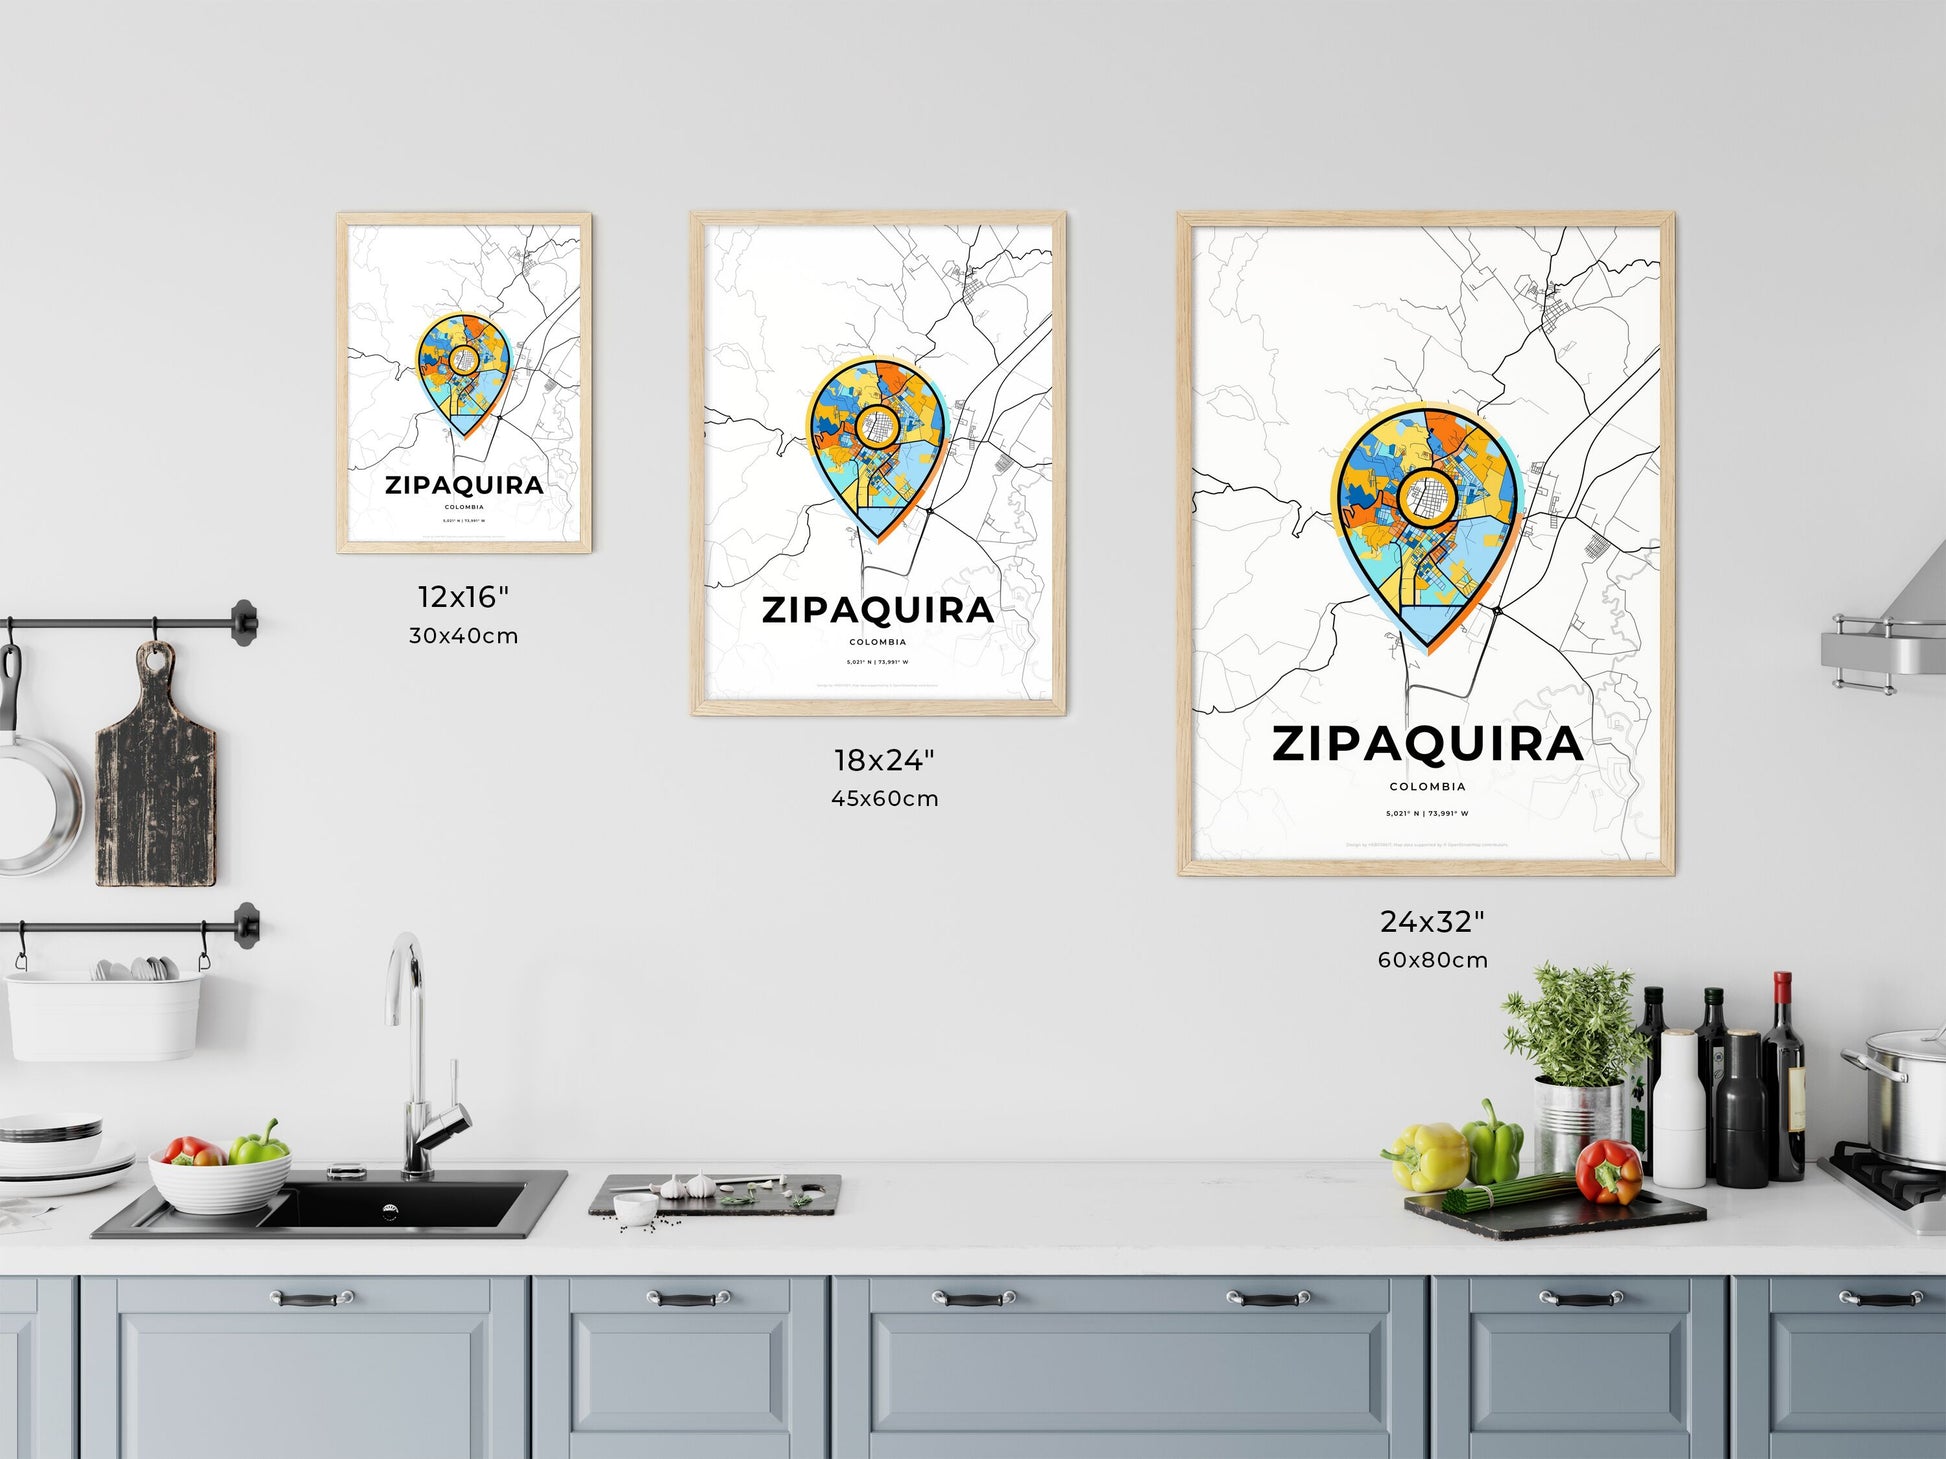 ZIPAQUIRA COLOMBIA minimal art map with a colorful icon. Where it all began, Couple map gift.